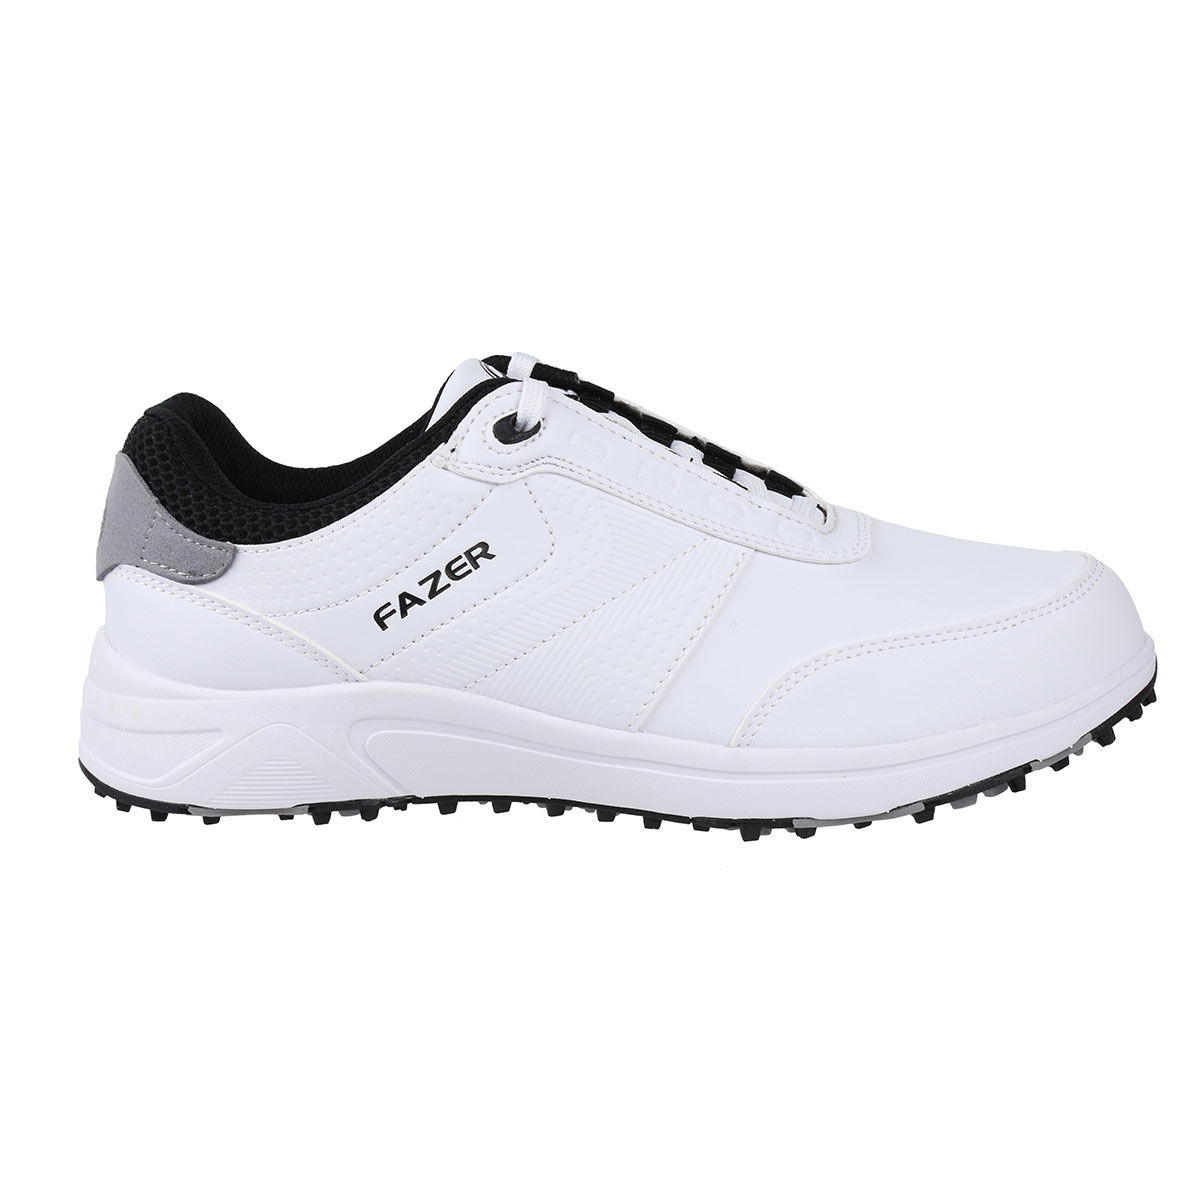 Fazer Golf Shoes, White and Black Waterproof Men’s Victory Spikeless, Size: 10 | American Golf